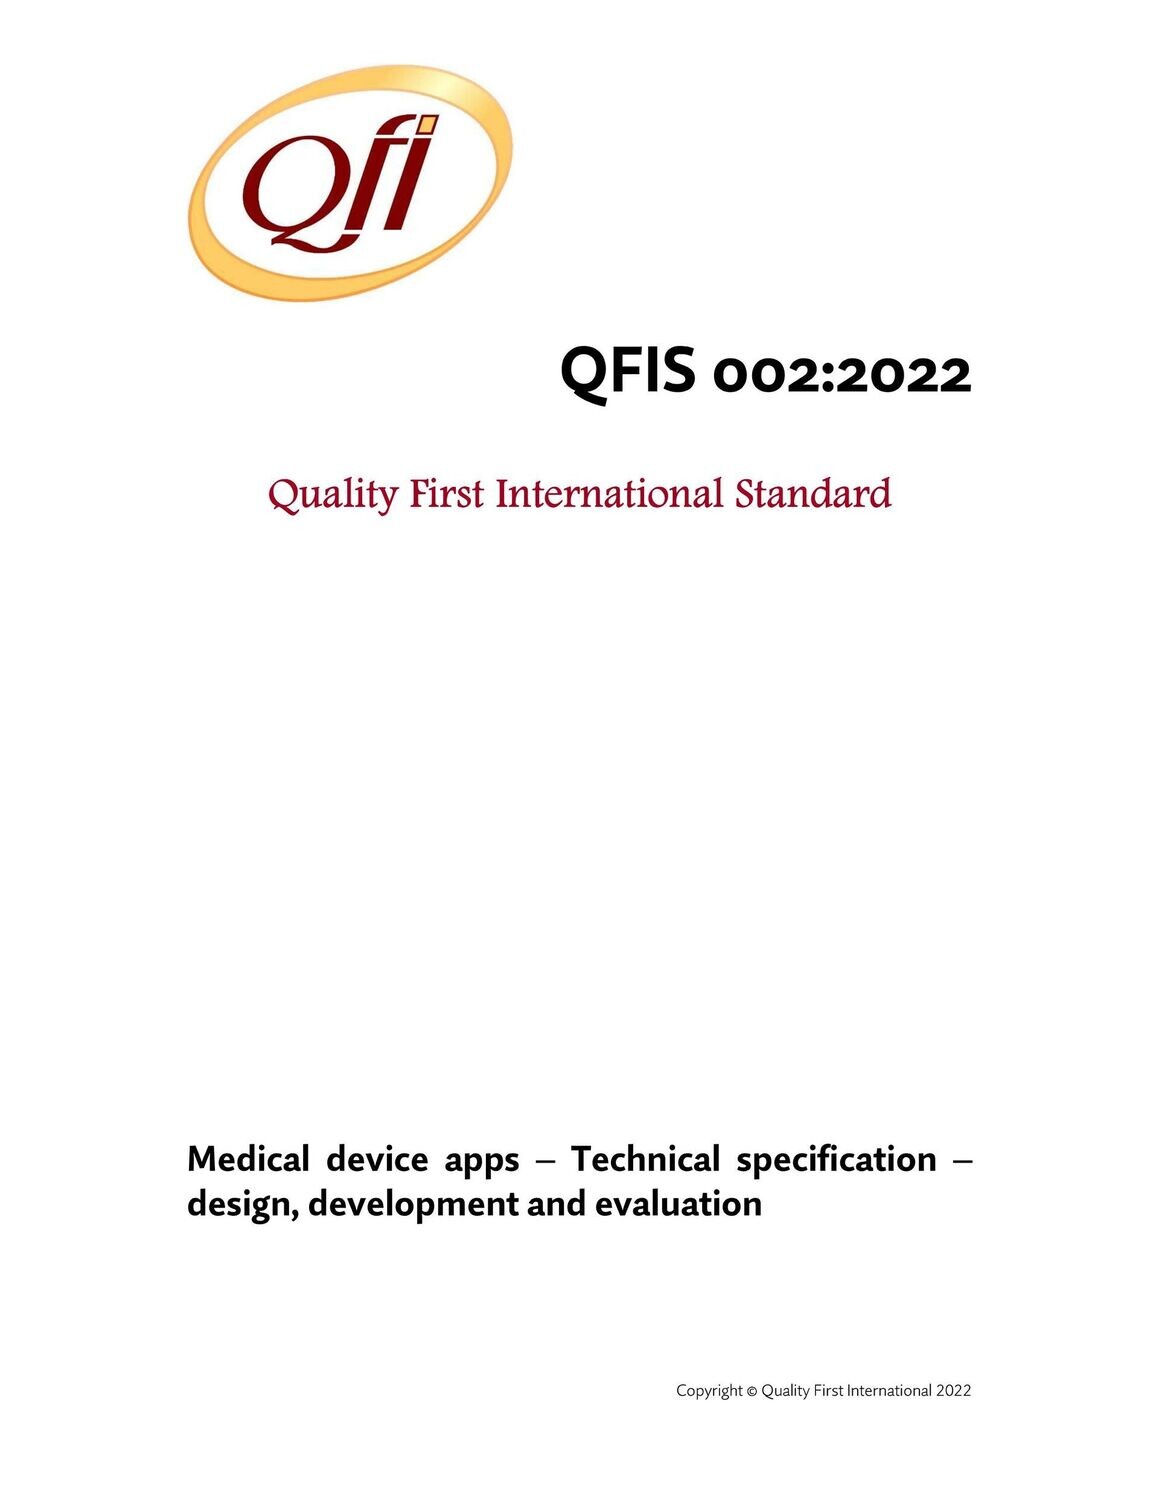 Medical device standard QFIS 002:2022 on Medical Apps published by Quality First International